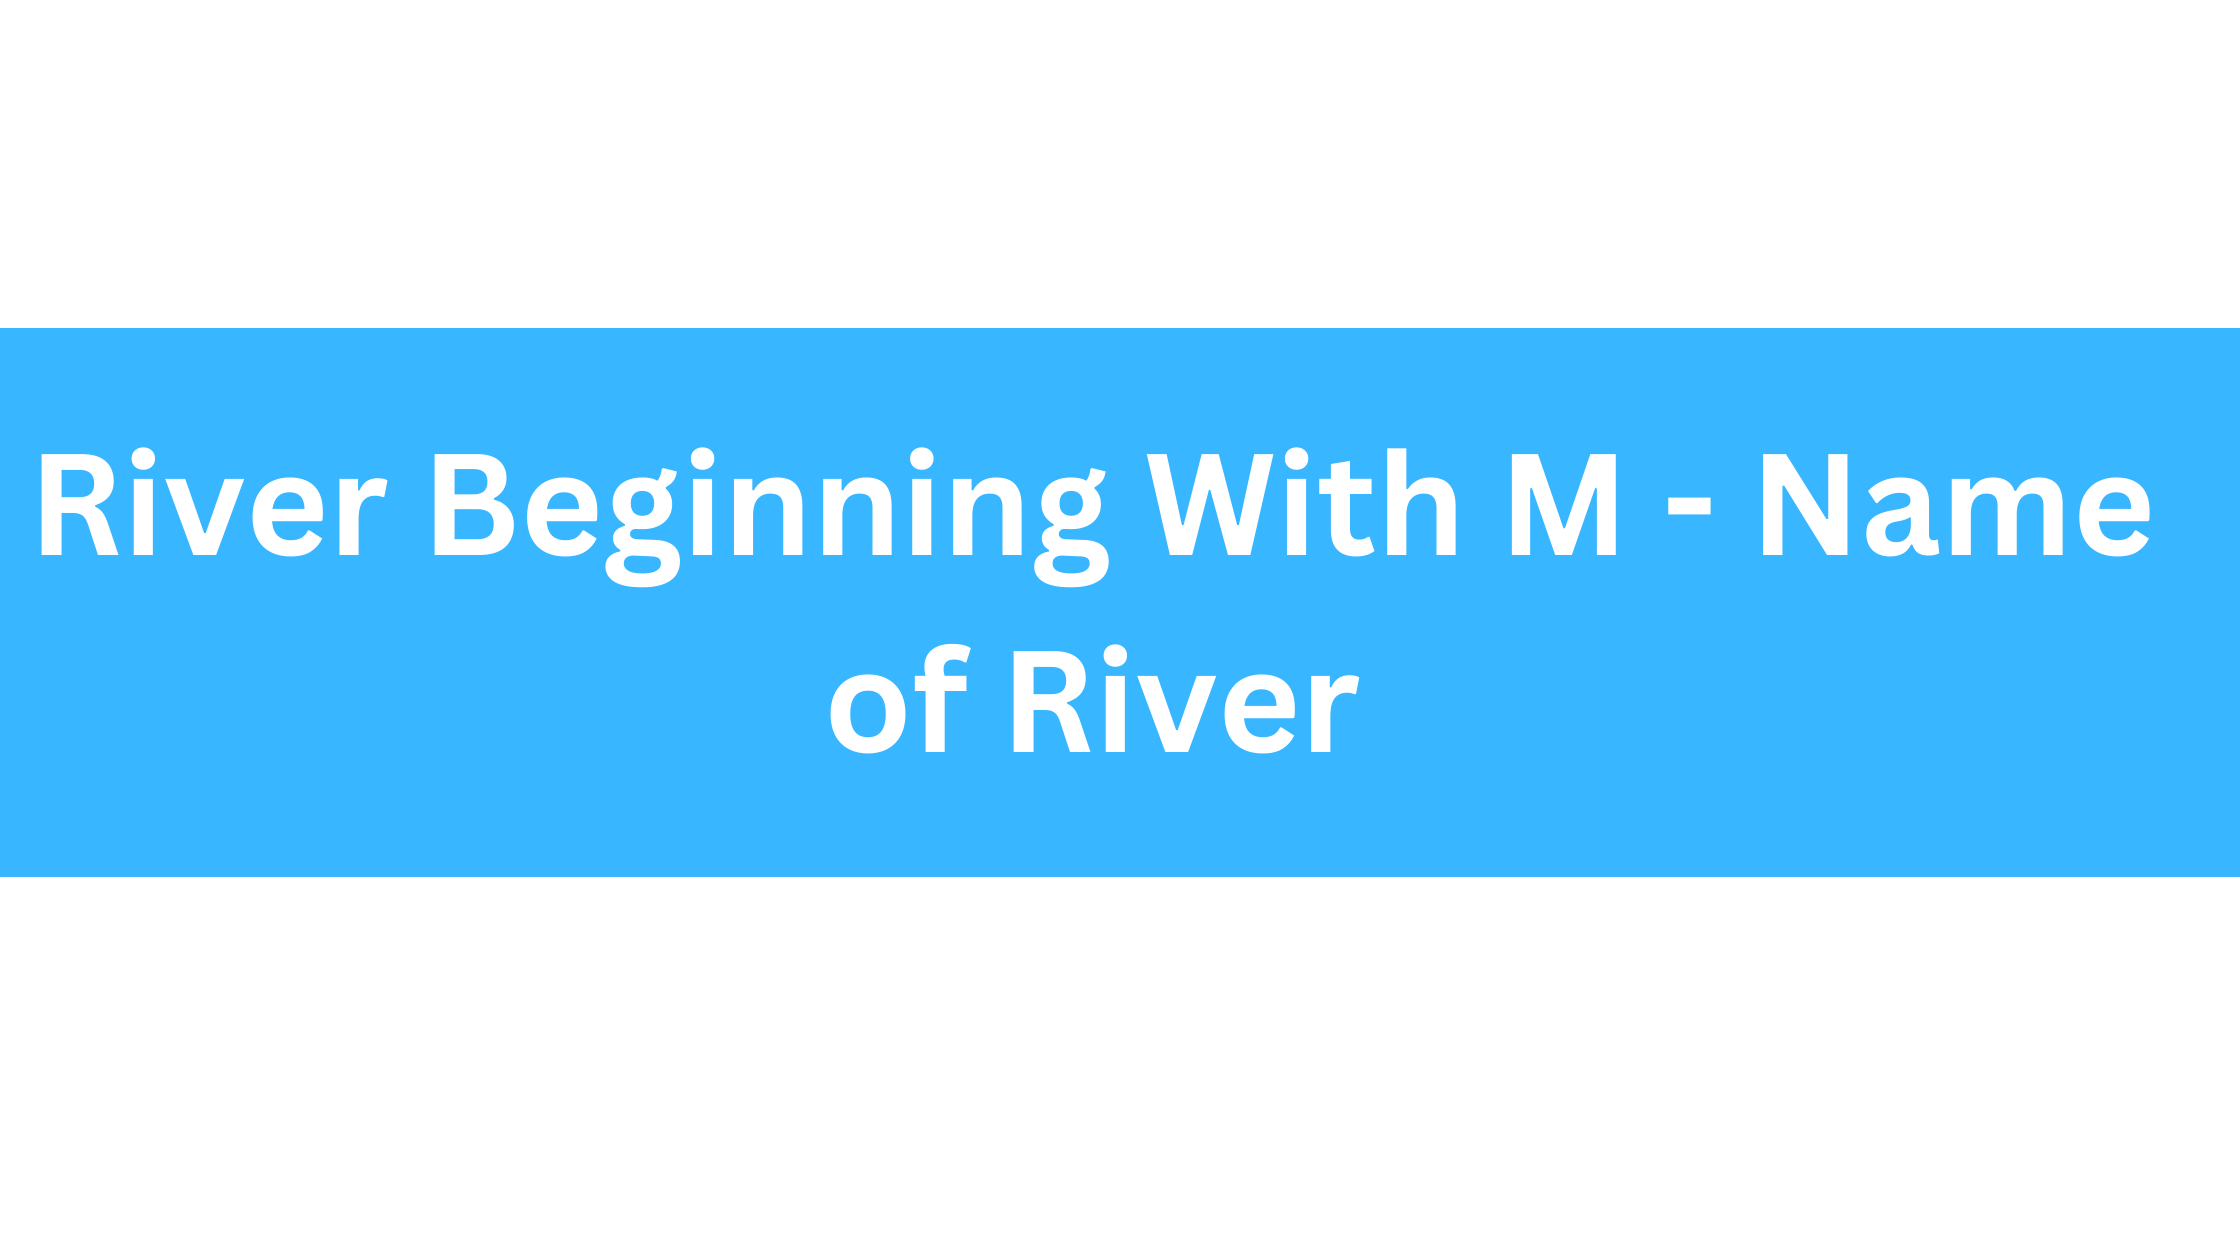 River Beginning With M